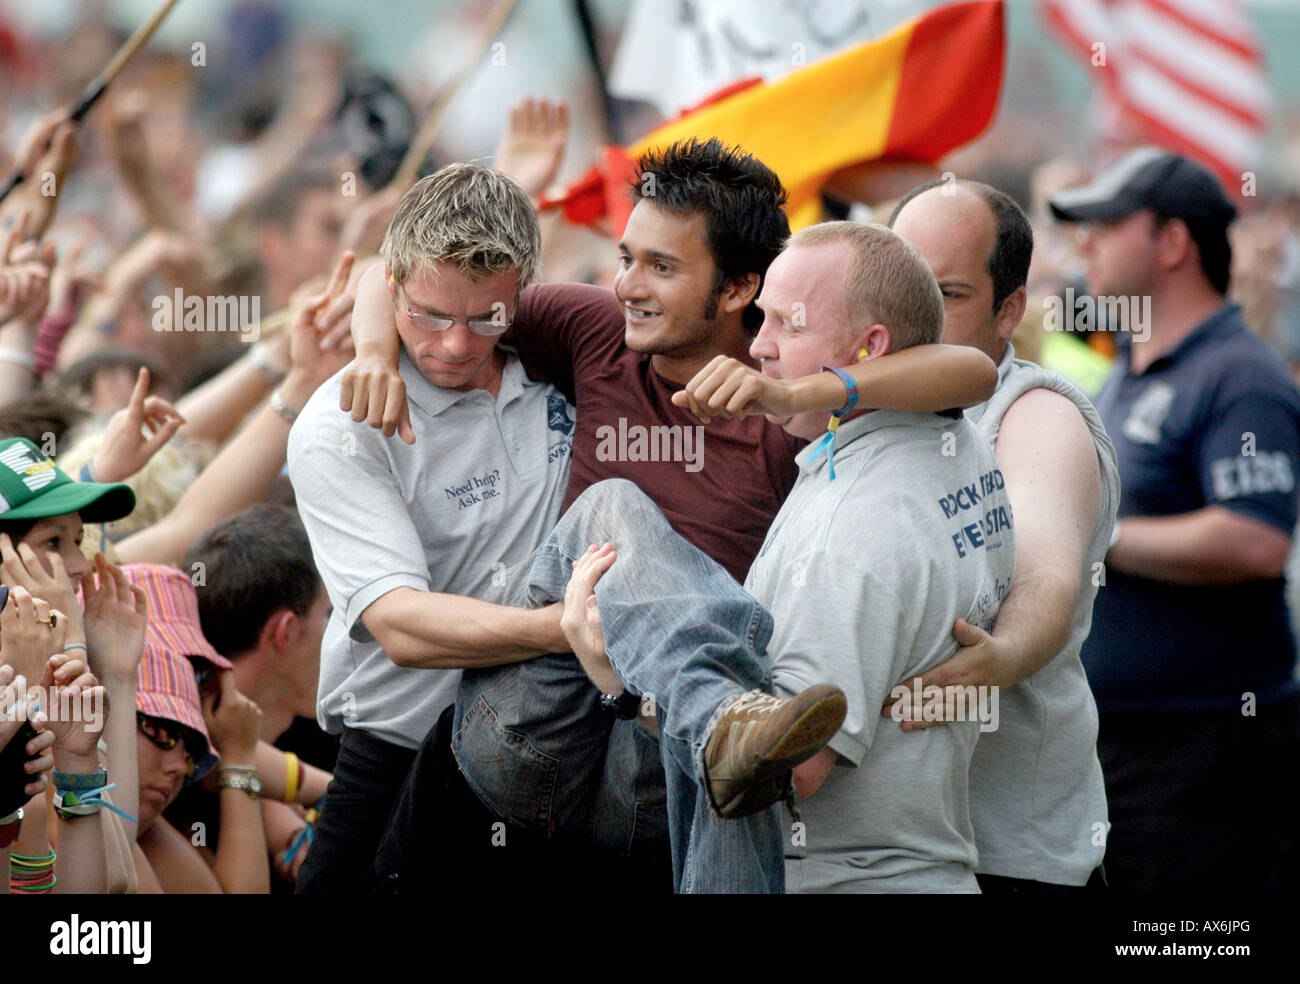 Security help a fan from the crowd in to the pit at T in the Park music festival Stock Photo